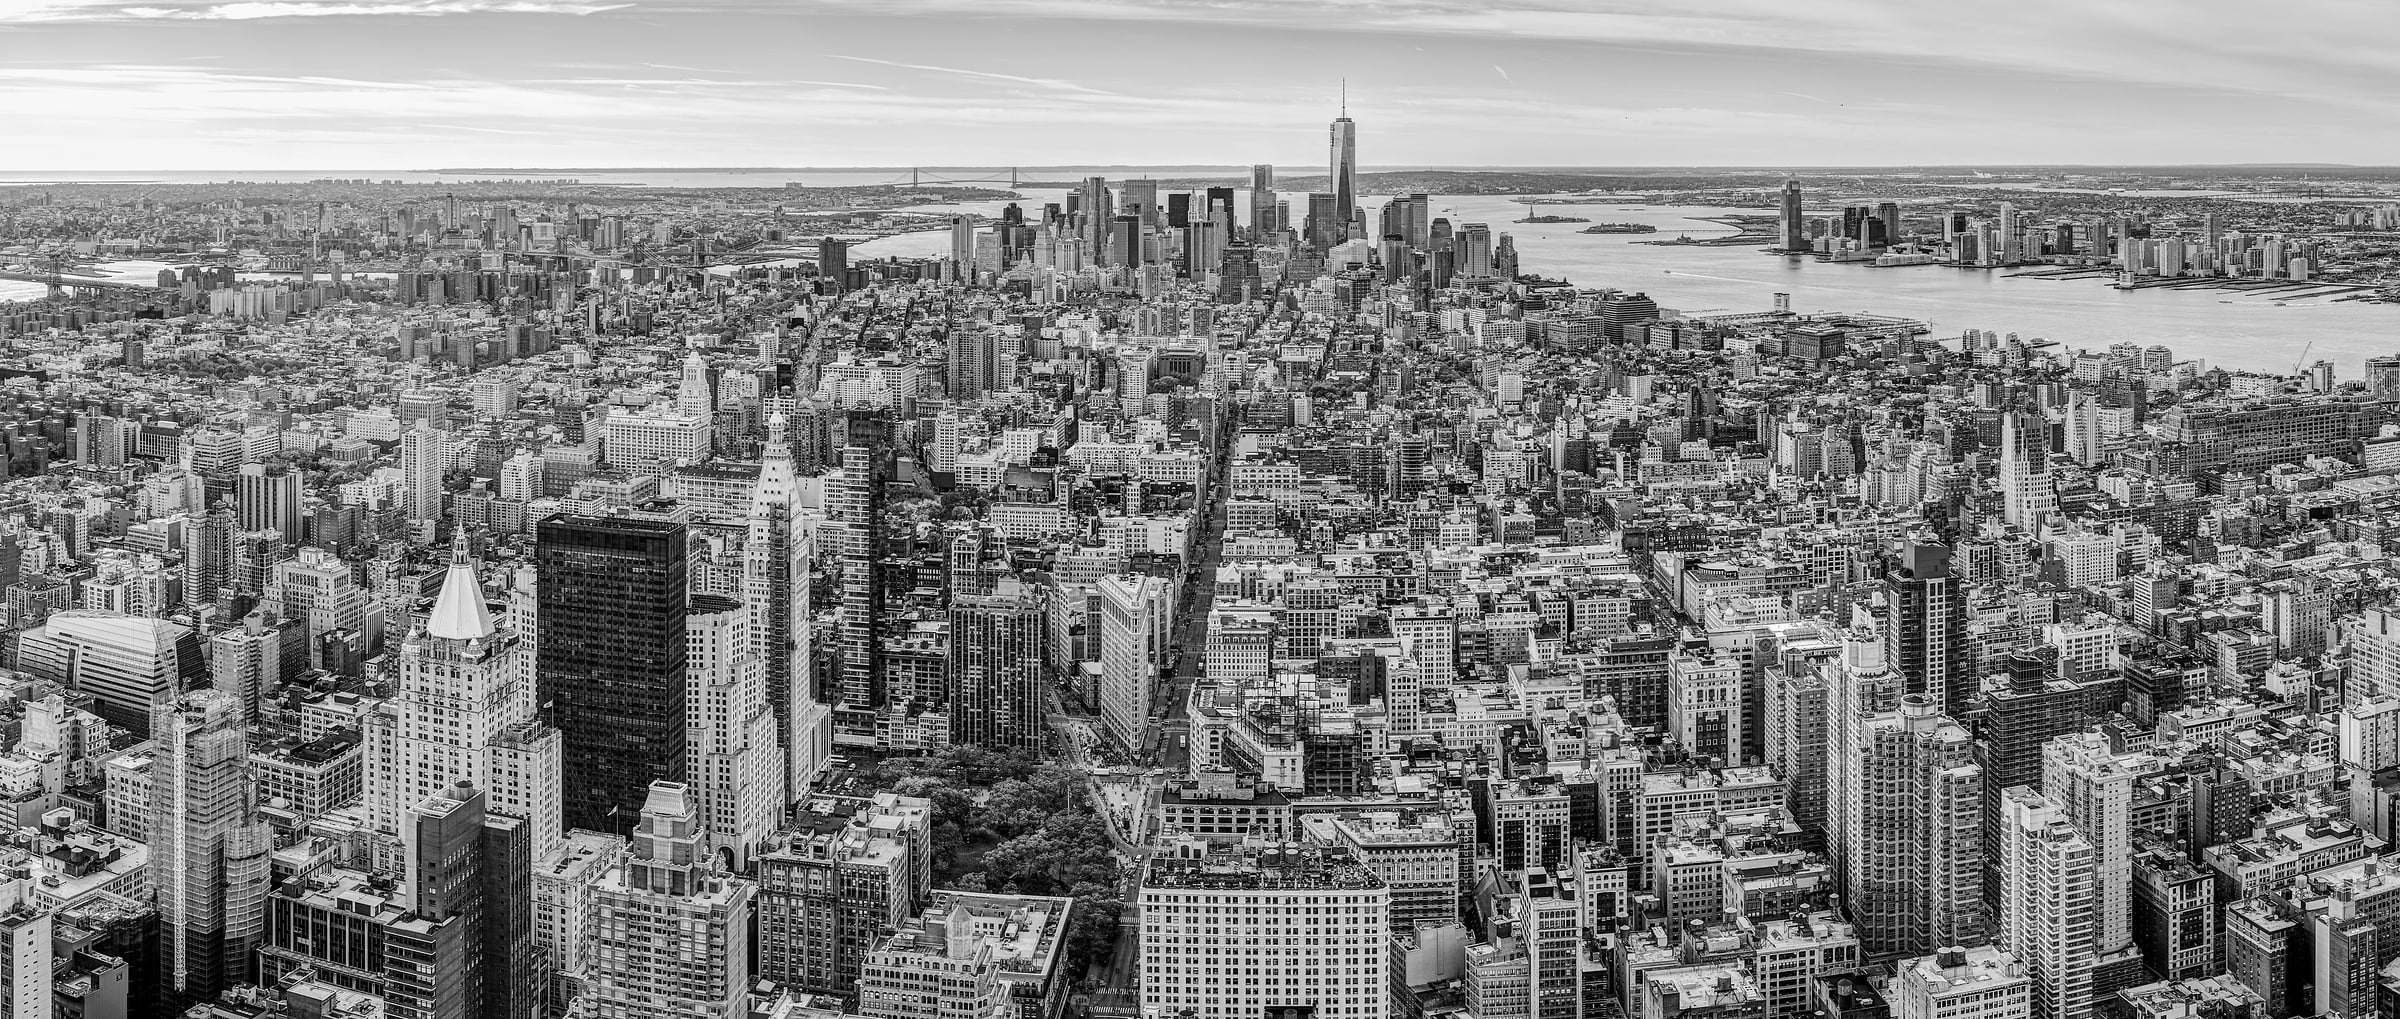 294 megapixels! A very high resolution, large-format VAST photo print of the view from the Empire State Building; black & white photograph created by Tim Lo Monaco at the Empire State Building in Manhattan, New York City, New York